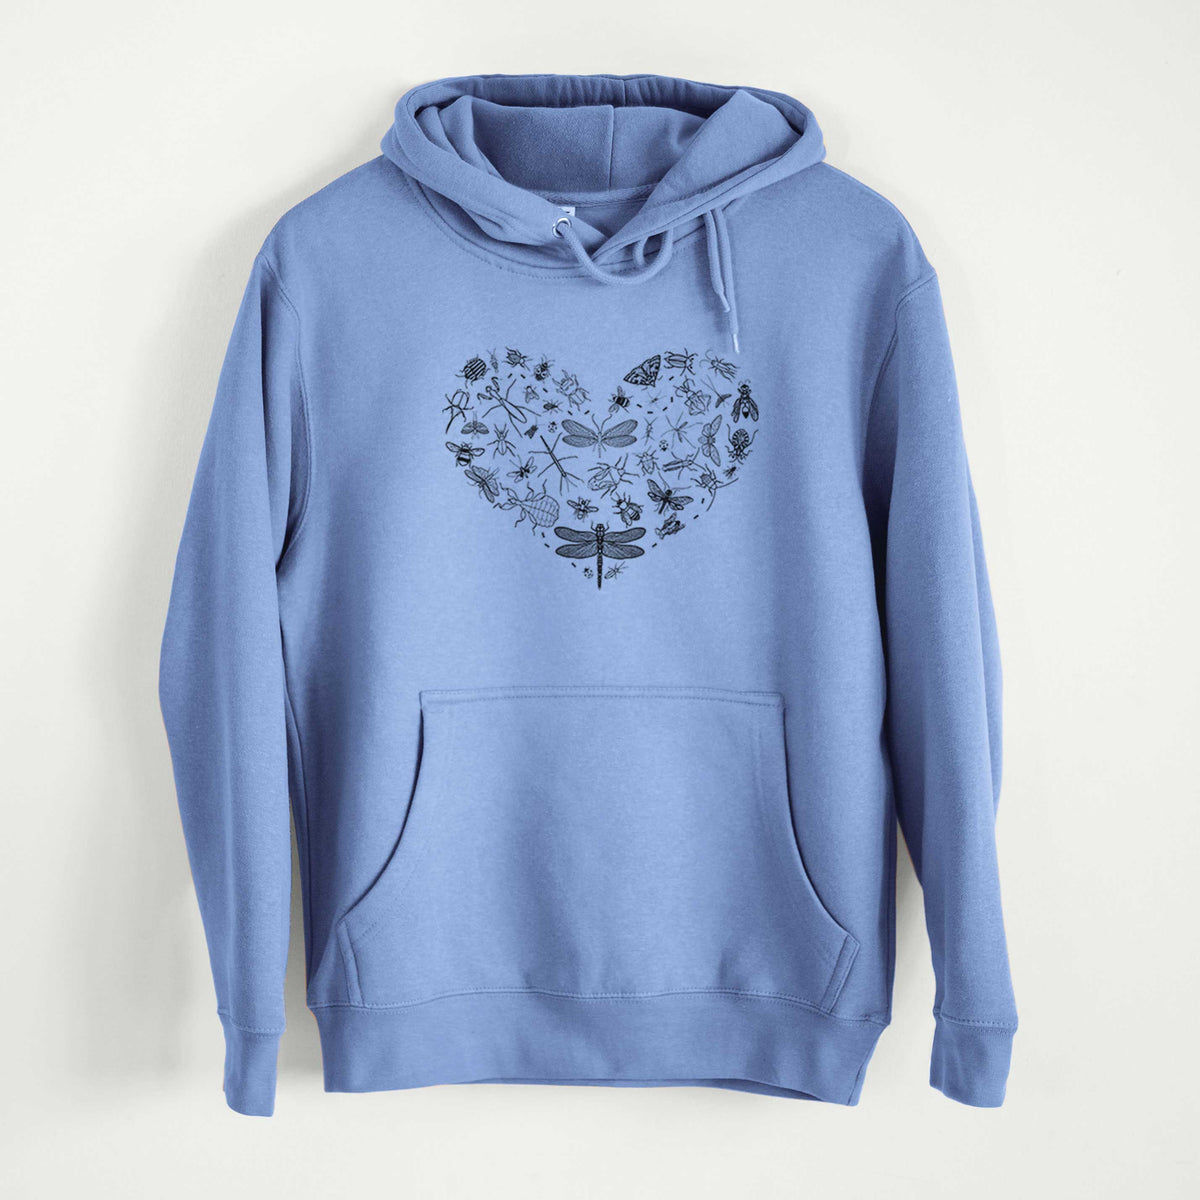 Heart Full of Insects  - Mid-Weight Unisex Premium Blend Hoodie